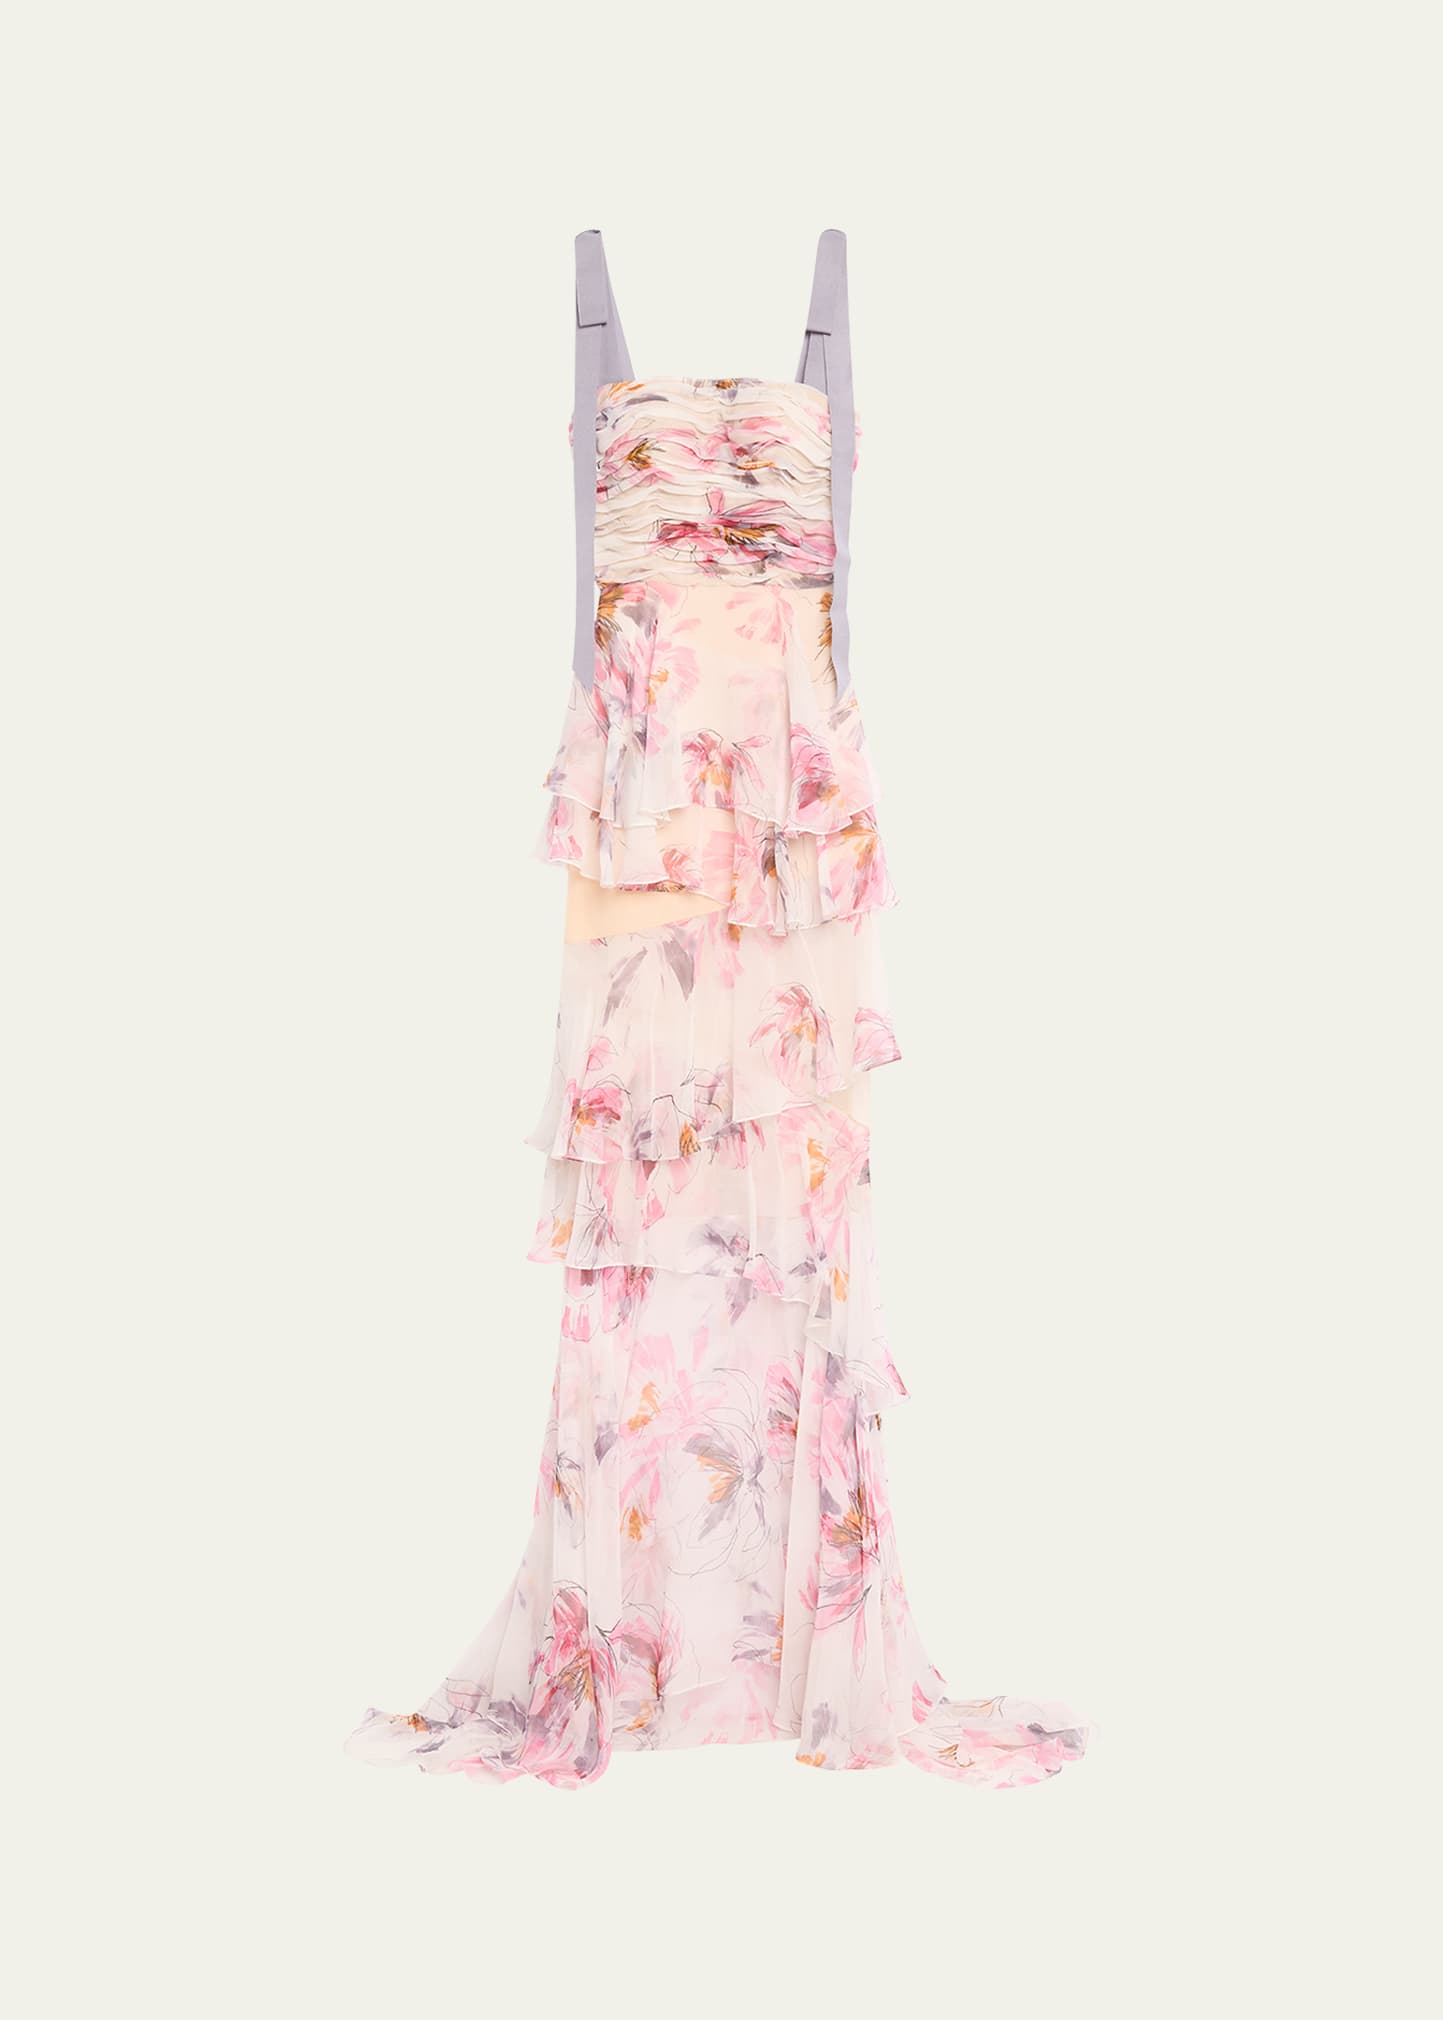 Pintucked Floral Print Bustier Gown with Bow Details